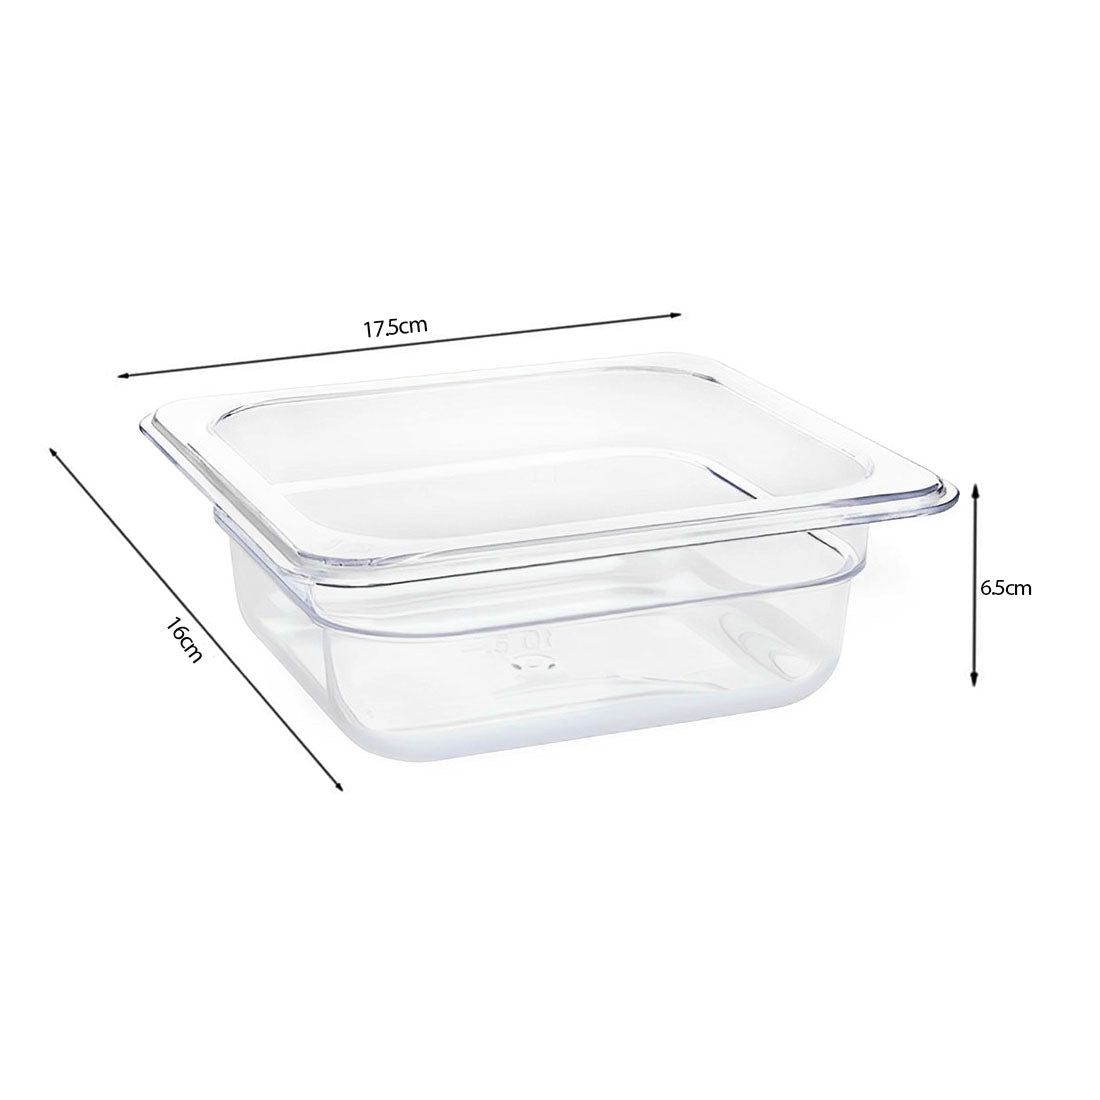 SOGA 65mm Clear Gastronorm GN Pan 1/6 Food Tray Storage Bundle of 2